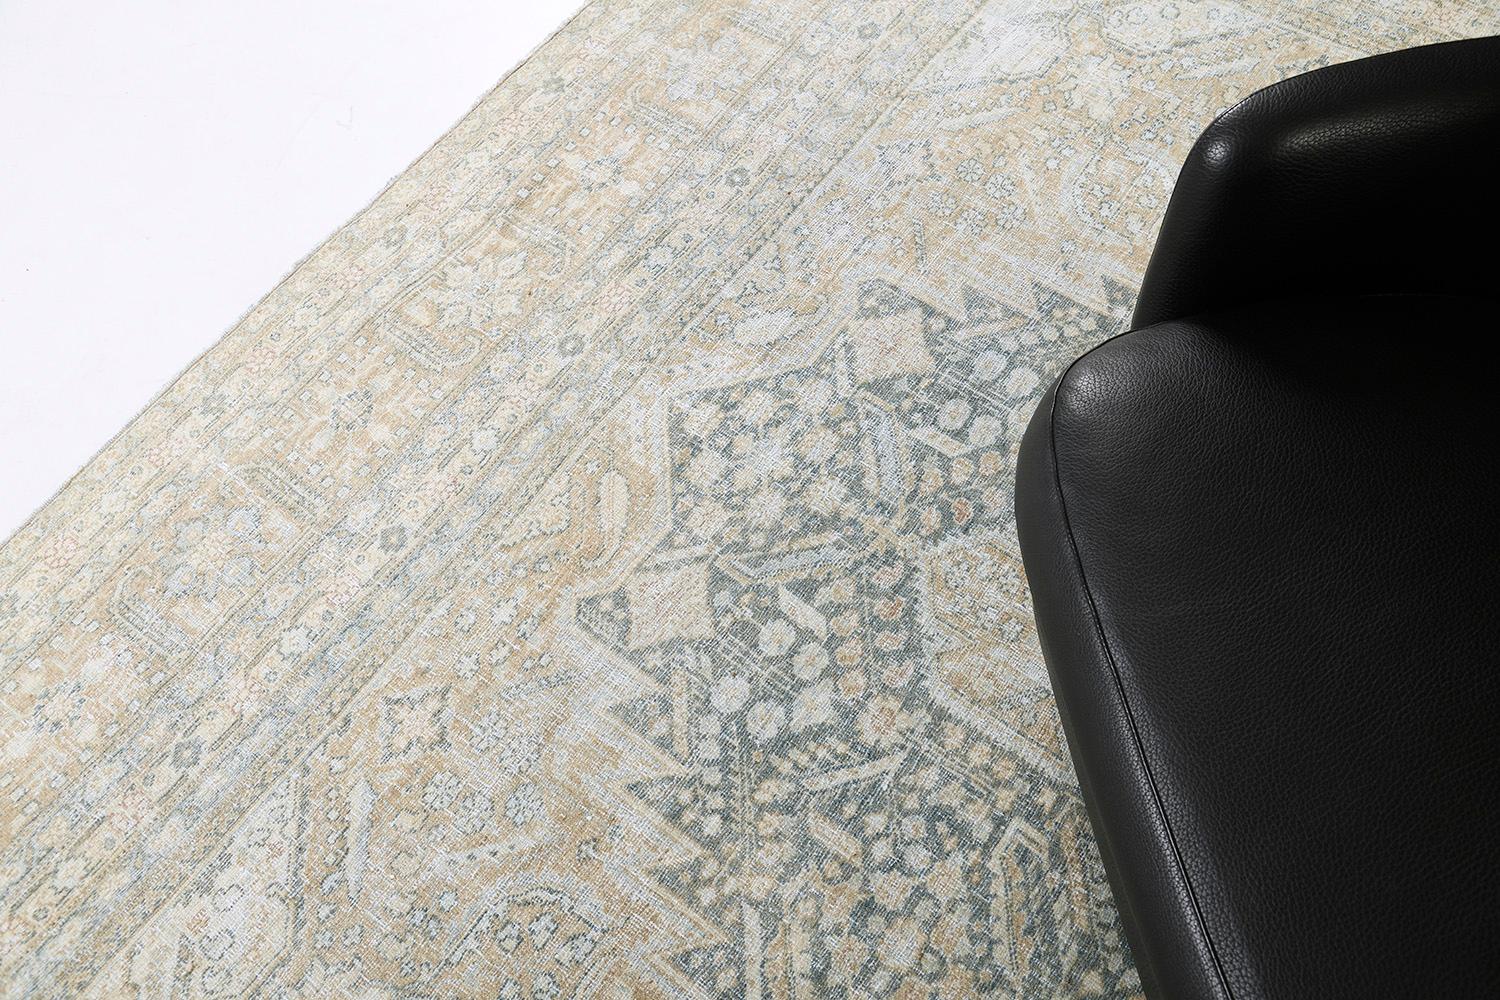 Featuring a central lozenge medallion that is composed of palmettes and stylized florals, this Antique Persian Tabriz is a piece that you will not resist. The abrashed golden field is graciously covered with an all-over botanical pattern that adds